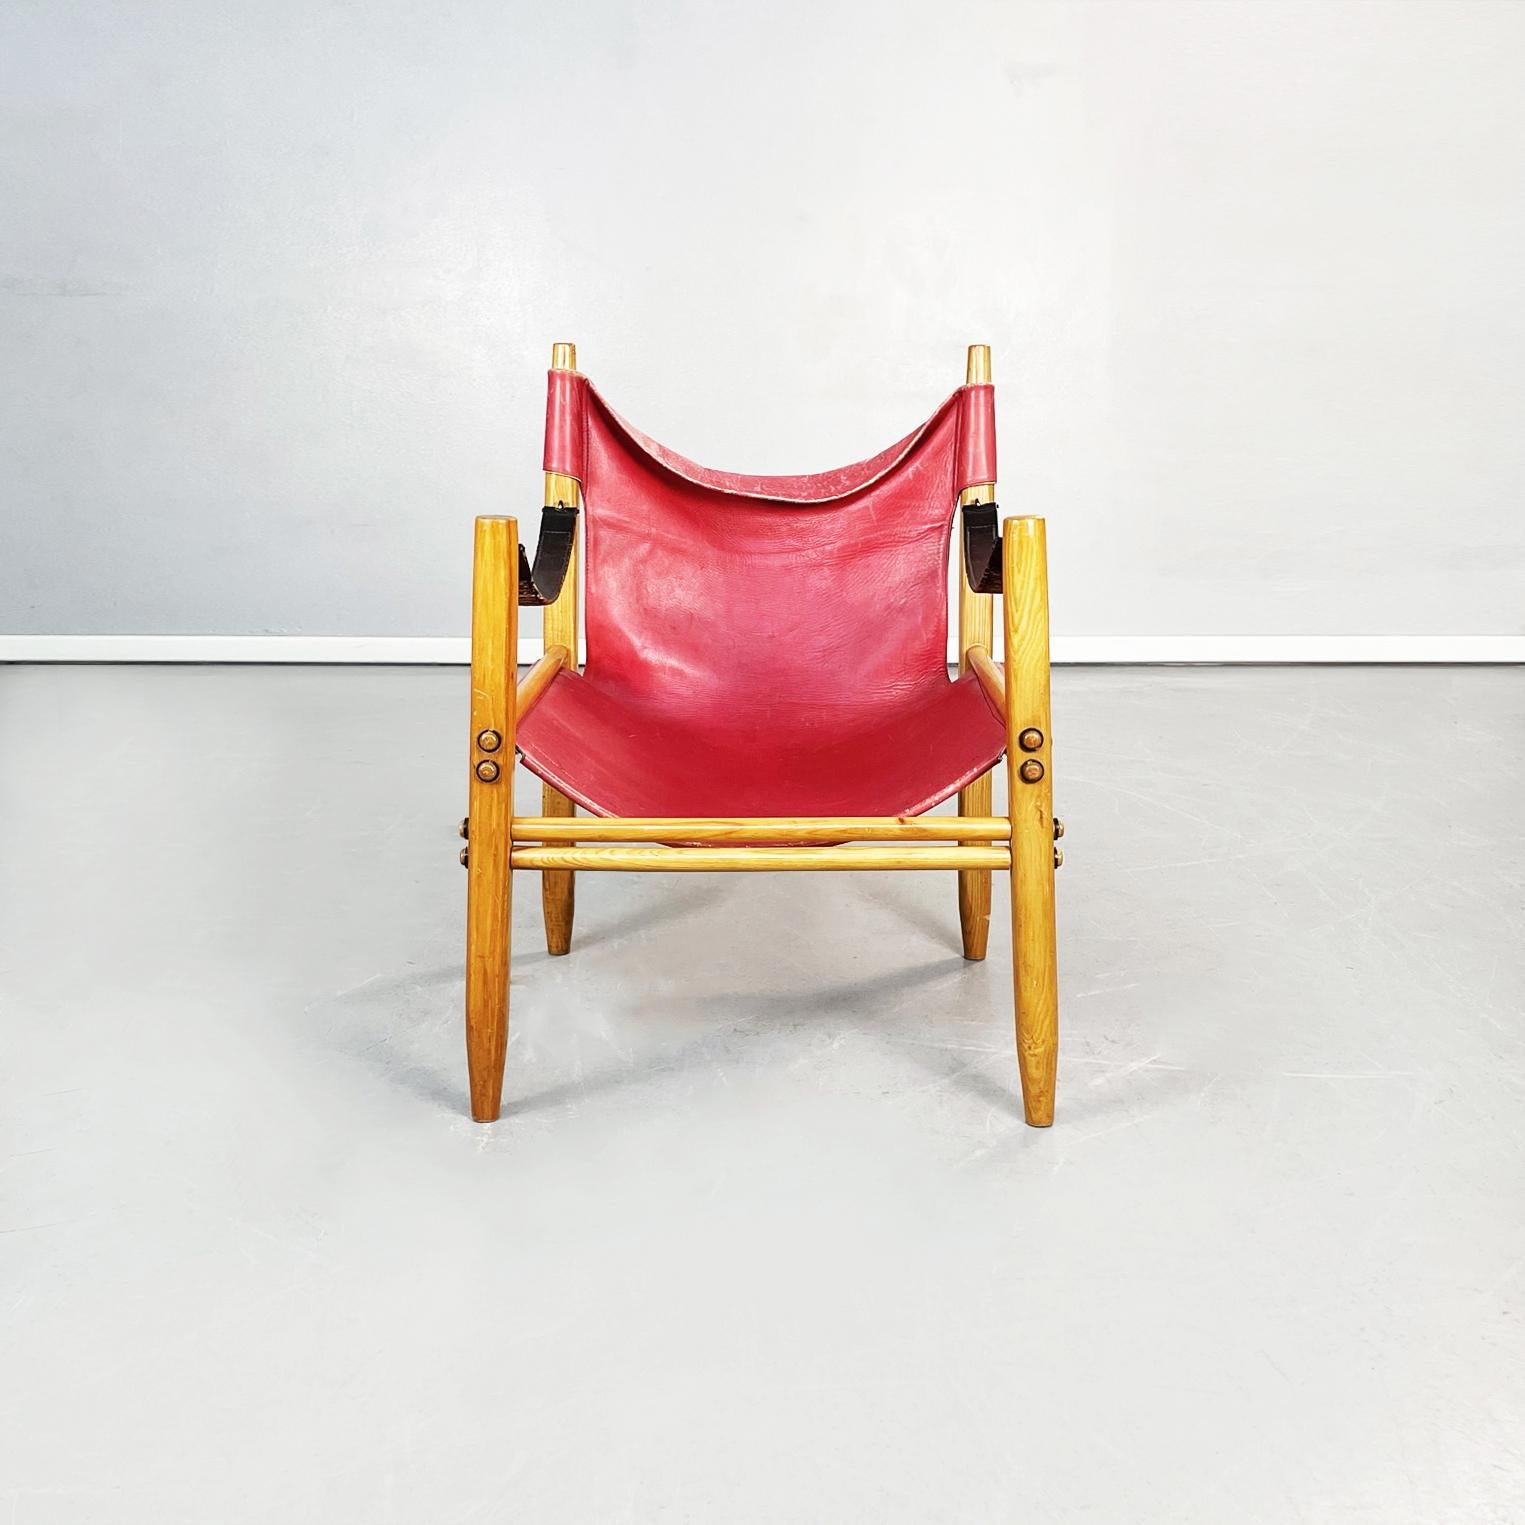 Italian mid-century Leather and wood armchair Oasi 85 by Legler for Zanotta, 1960s
Armchair mod. Oasi 85 in red leather and wood. The seat and back are made of soft red leather, fixed to the structure. The armrests are made with leather straps and